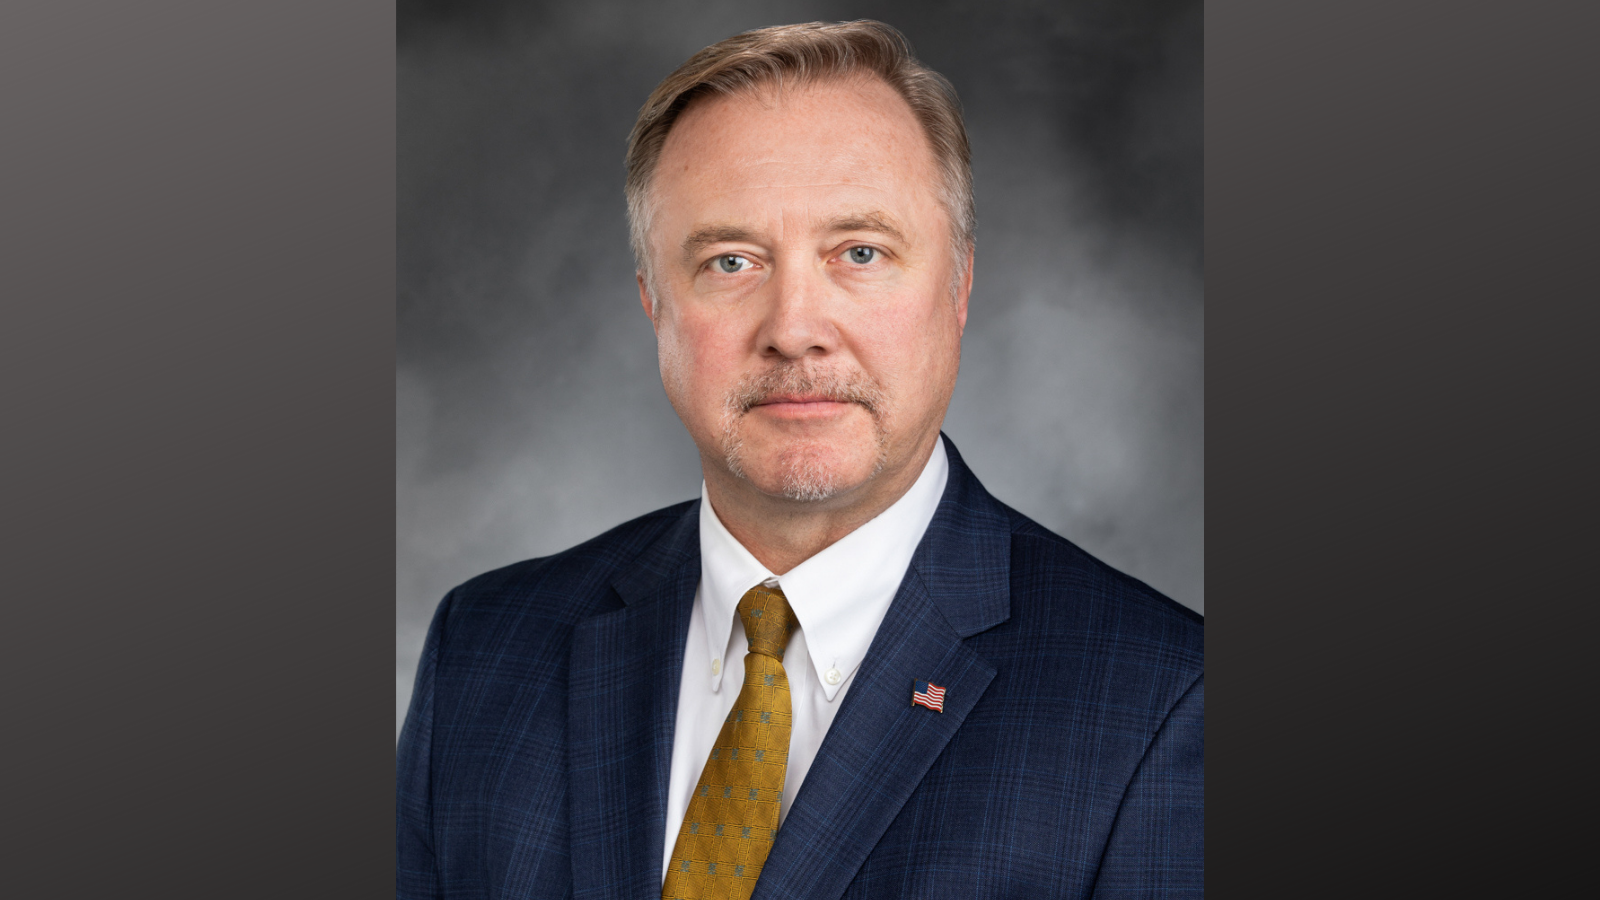 AUDIO: Ericksen to host sessions for business owners concerned about economic recovery